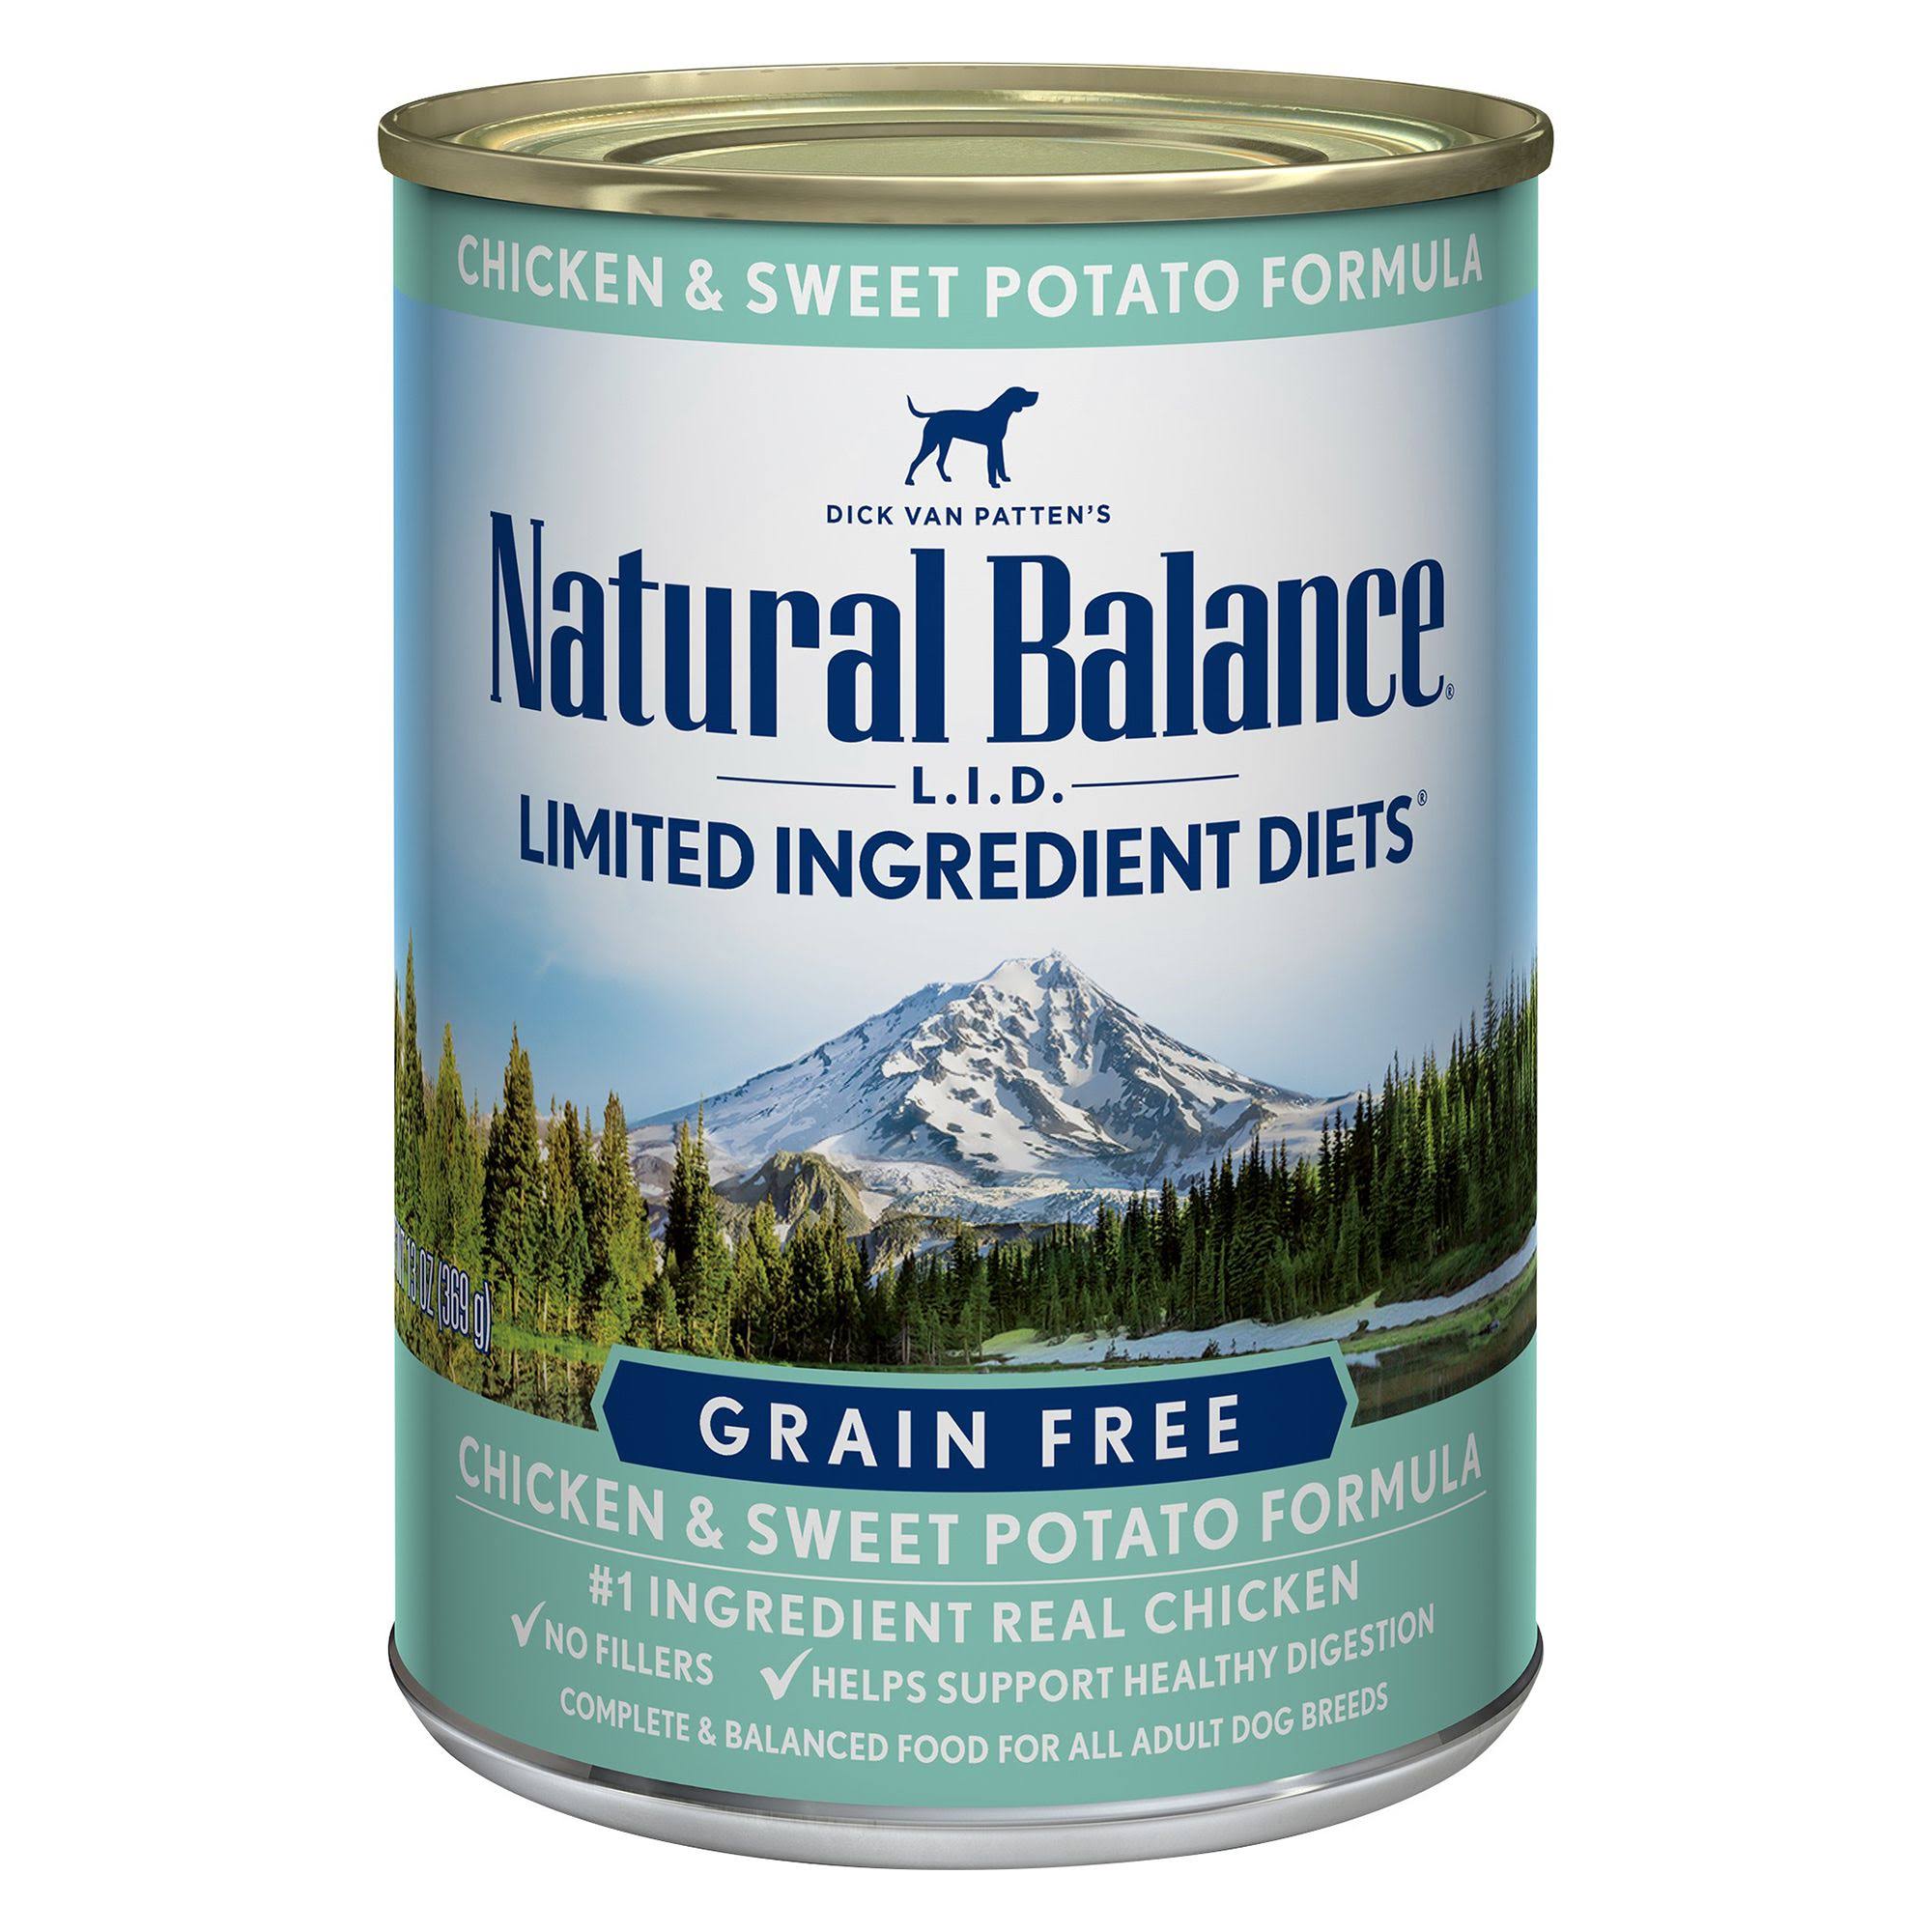 Natural Balance Limited Ingredient Diet Dog Food - Chicken and Sweet Potato